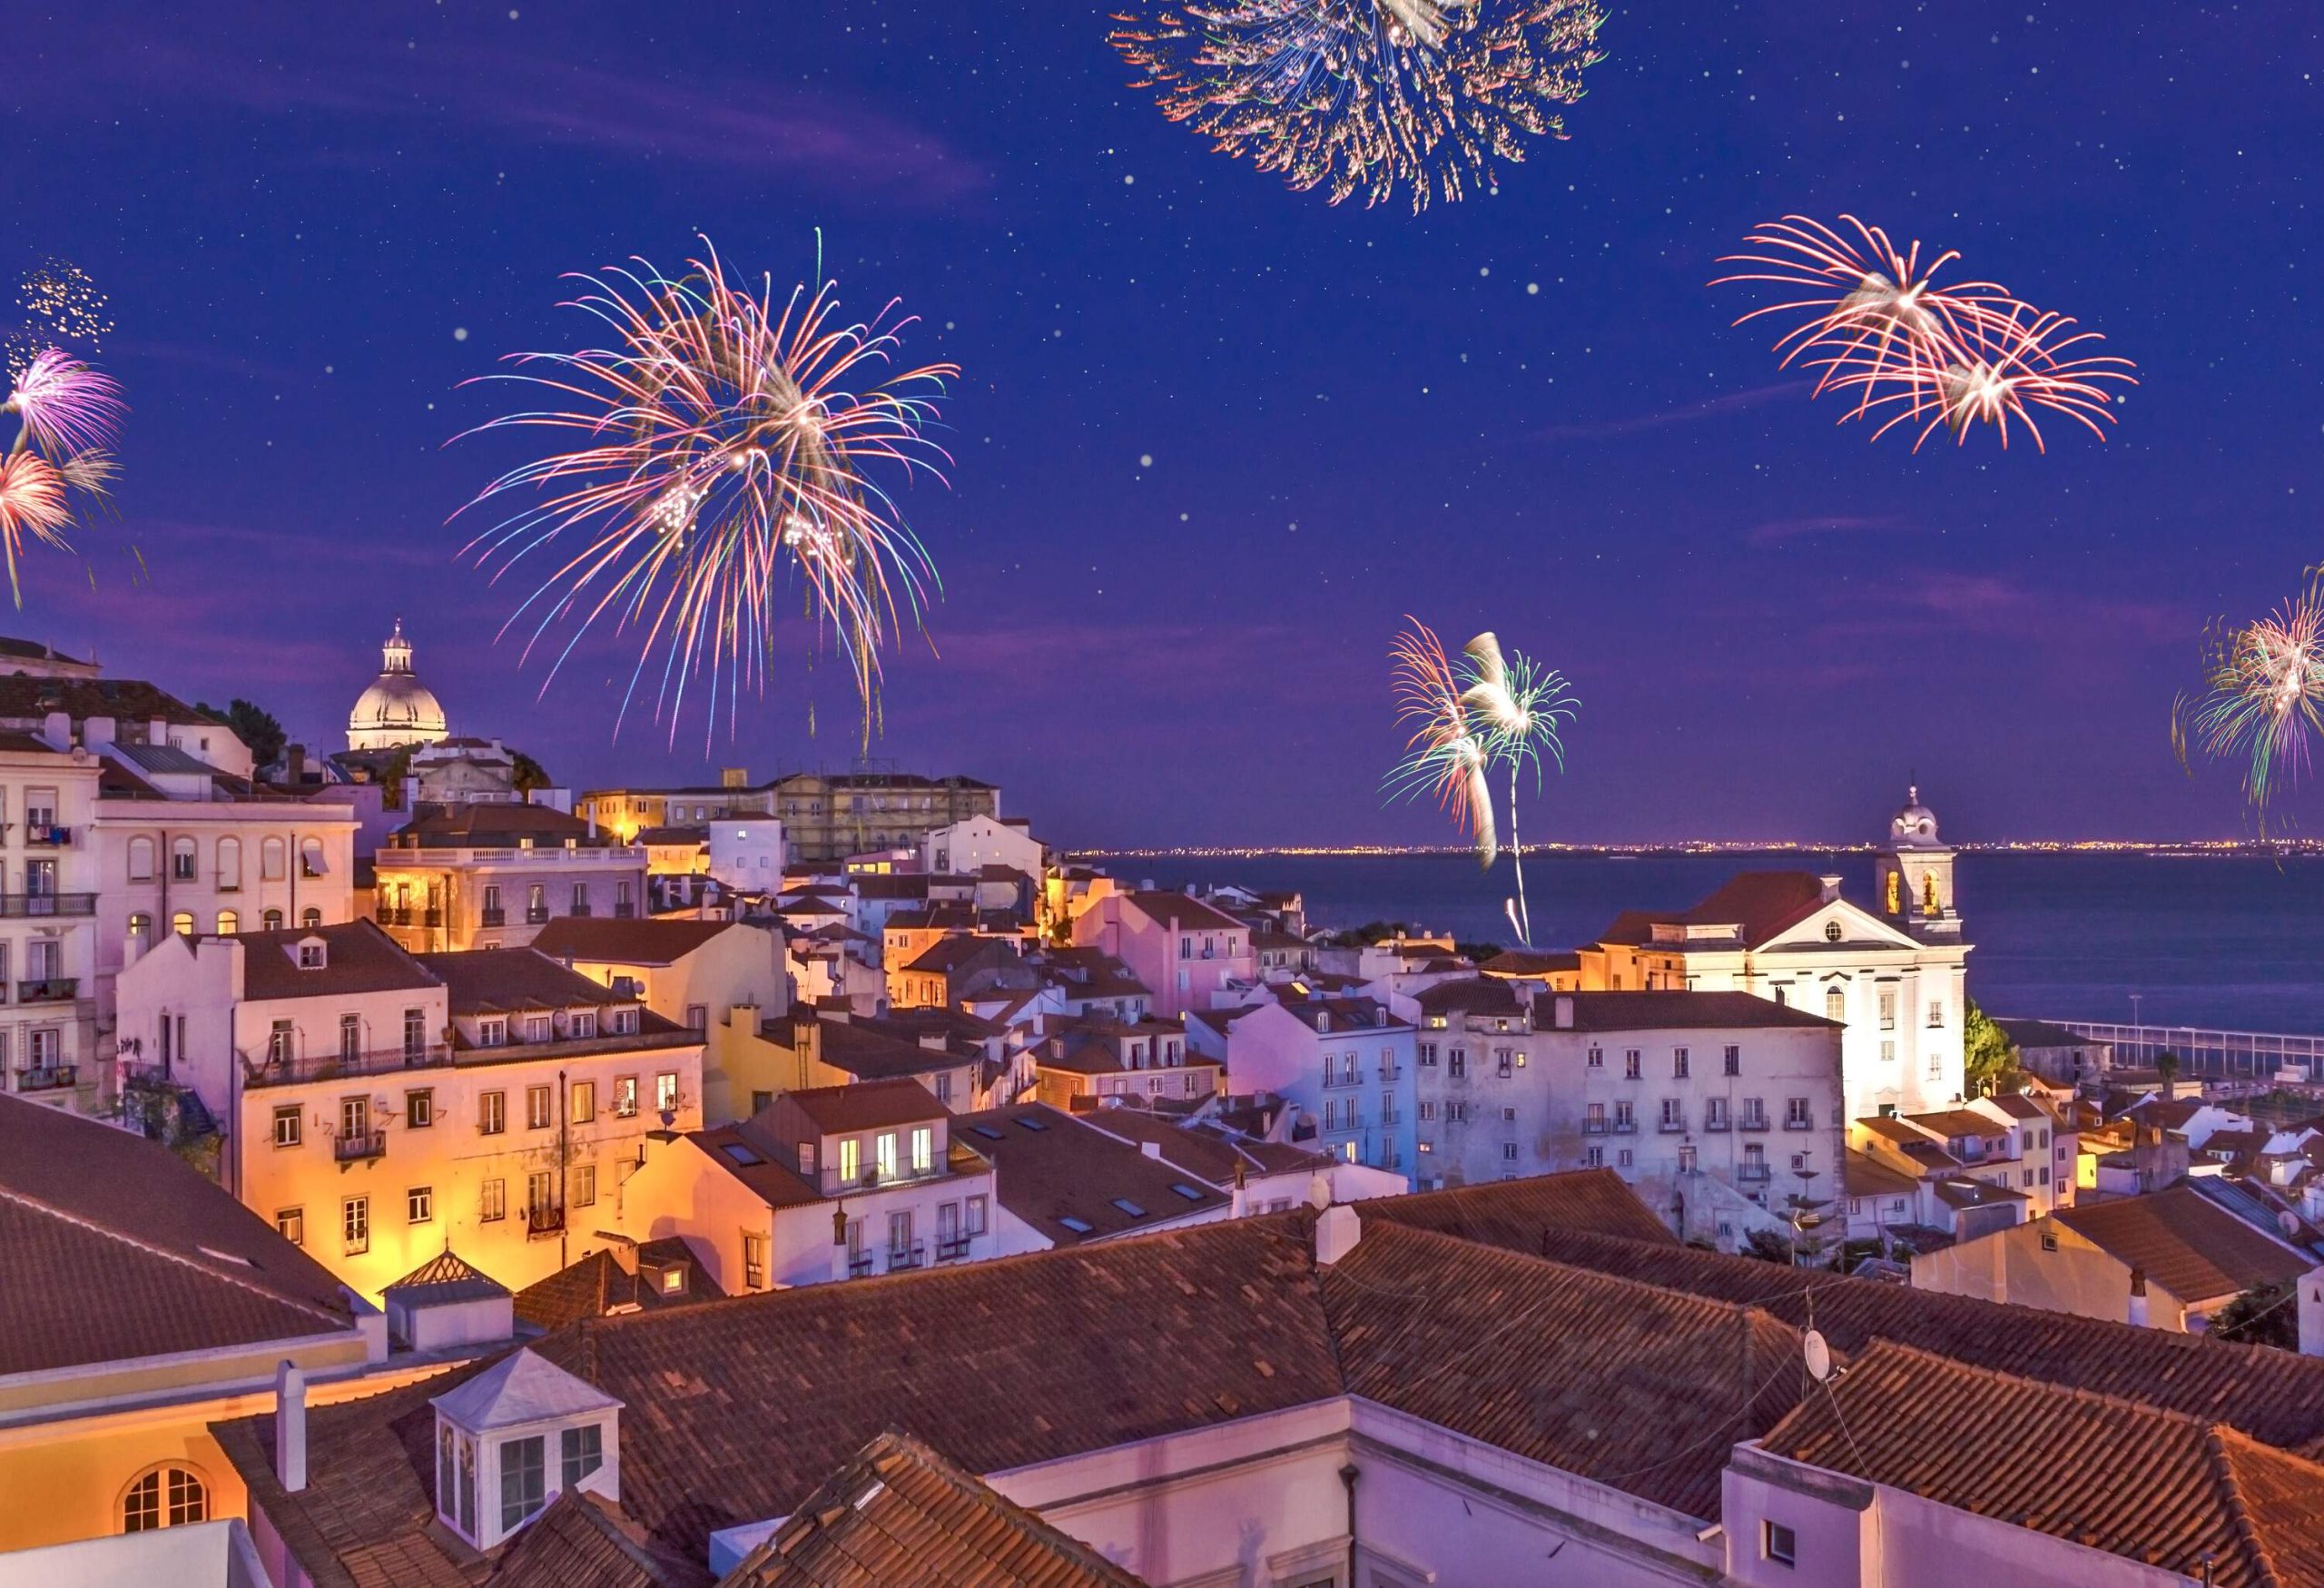 Fireworks illuminating the night sky above a historic town.